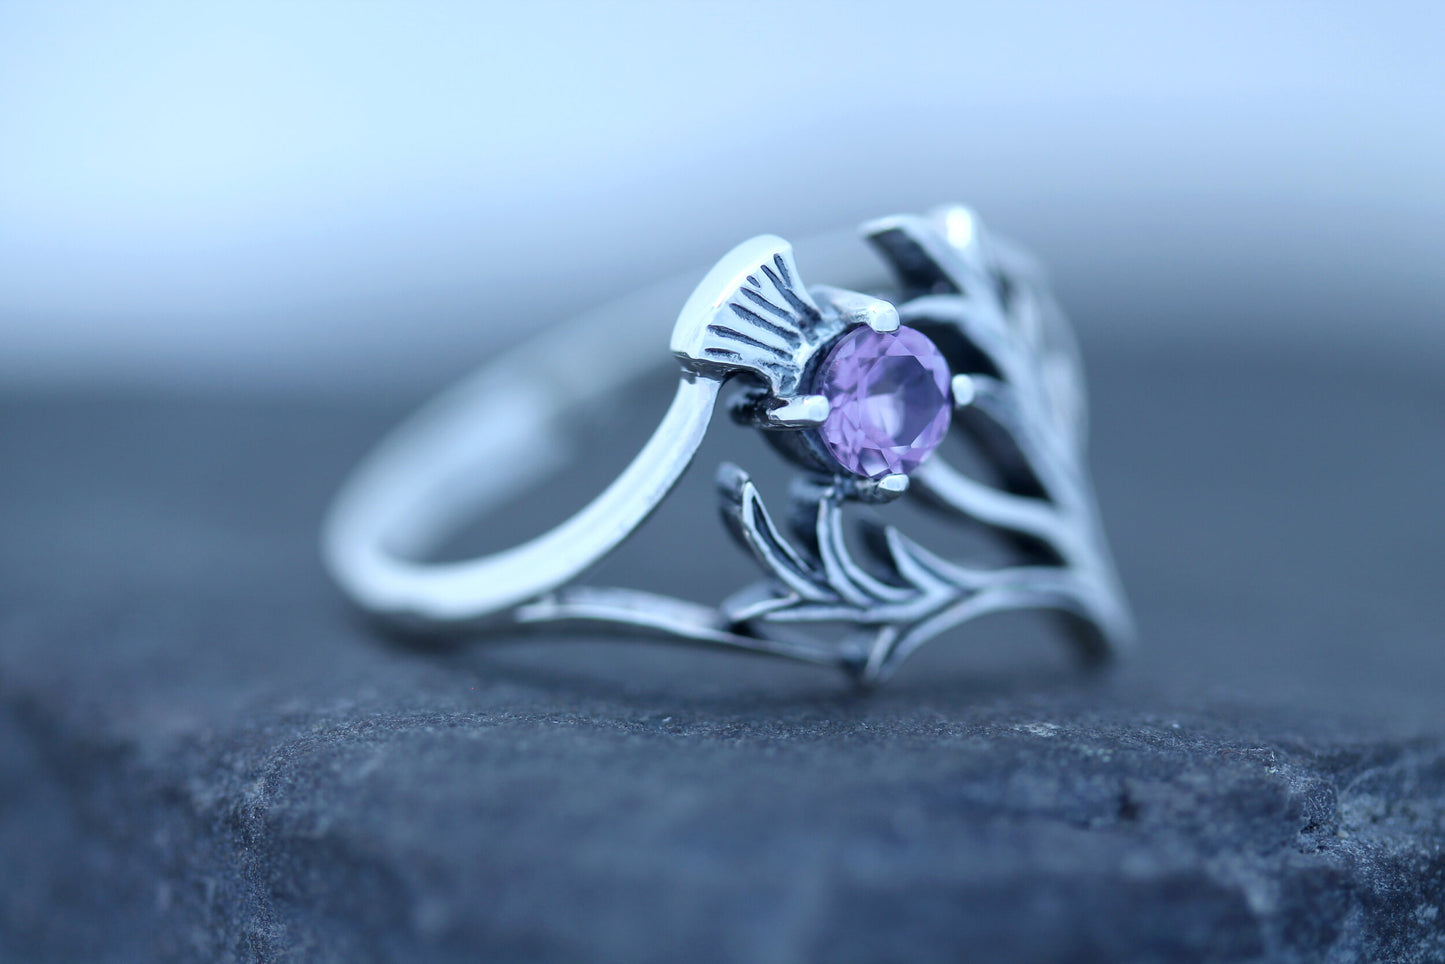 Scottish Thistle Ring - Spiky Leaf with Cut Amethyst (Large)